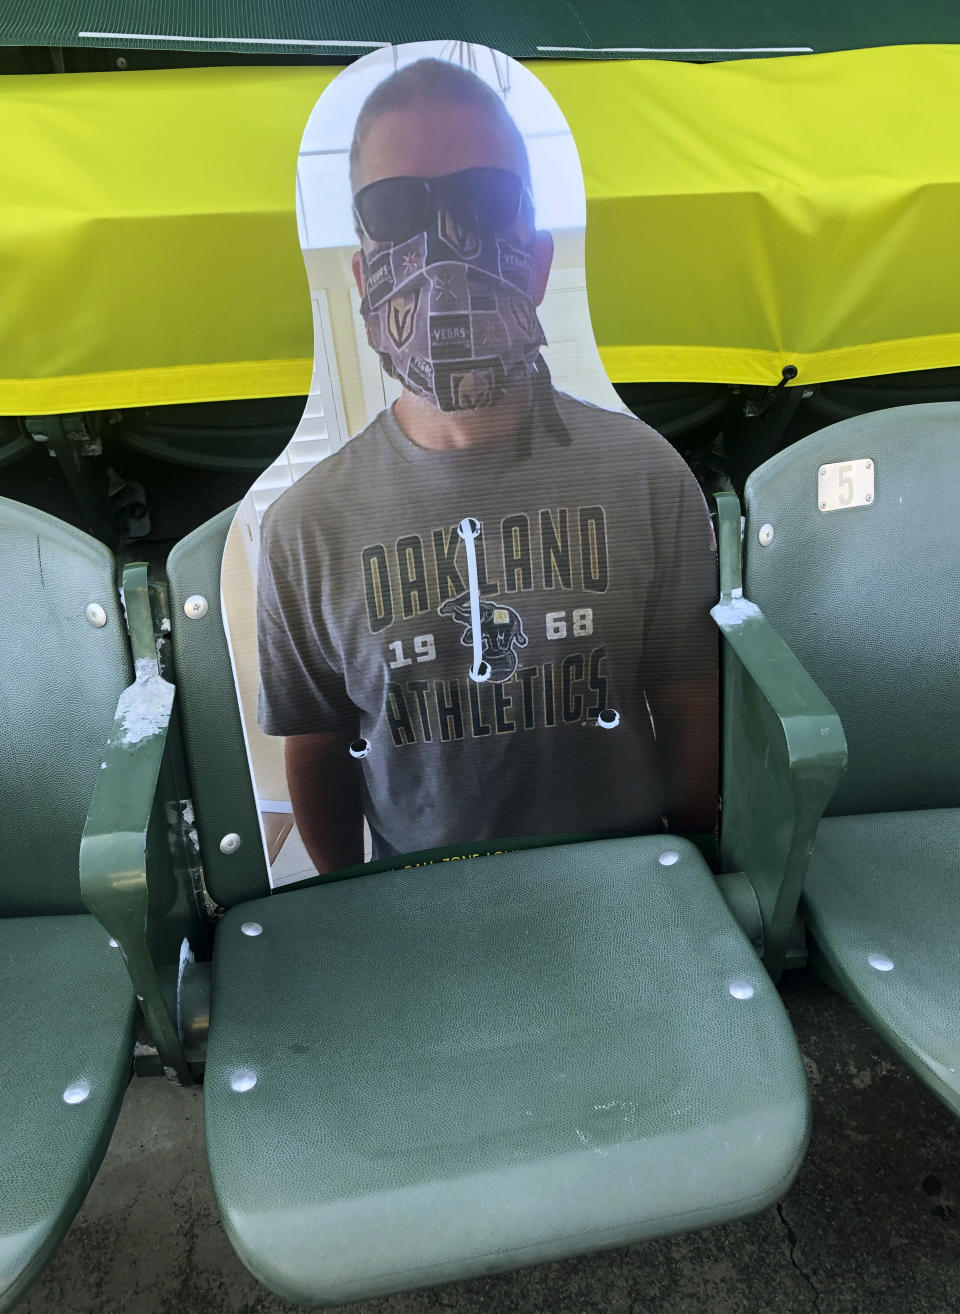 A cardboard cutout depicting A's fan Richard Lovelady of Henderson, Nev., is displayed in a section of the Oakland Coliseum after the baseball game between the Los Angeles Angels and the Oakland Athletics on Monday, July 27, 2020, in Oakland, Calif. An approach taken by some teams is sending out souvenirs to fans if their cardboard cutout gets hit by a ball. The Longtime A's supporter lucked out last Friday night when his cutout — section 126, row 24, seat 4 — was struck by Matt Olson's foul.(AP Photo/Ben Margot)